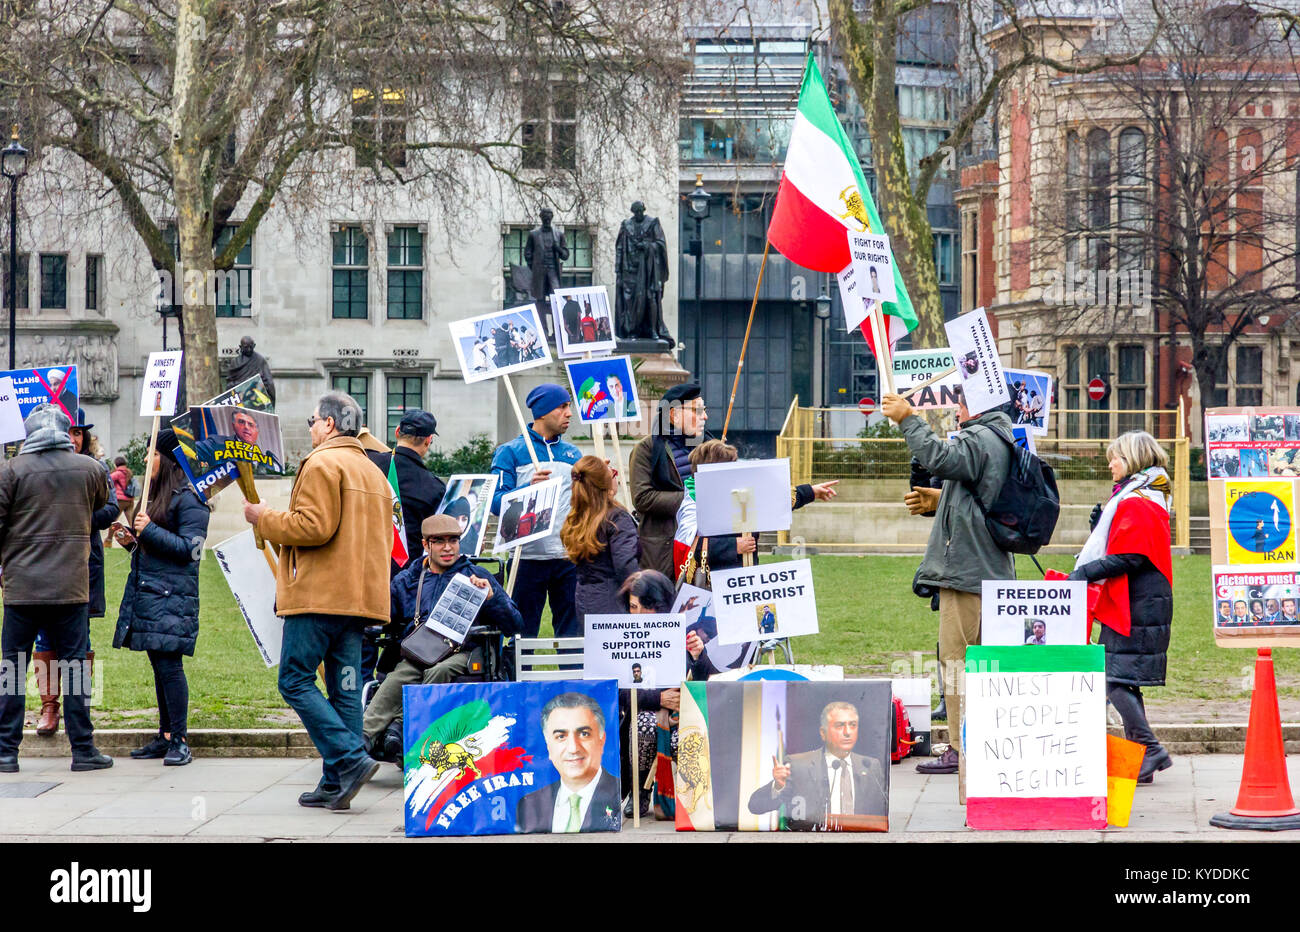 Parliament Square, London, UK. 14th Jan, 2018. Iranian protesters gather opposite the British Parliament building to demonstrate against human rights abuses by the current regime in Iran. Credit: Alan Fraser/Alamy Live News Stock Photo